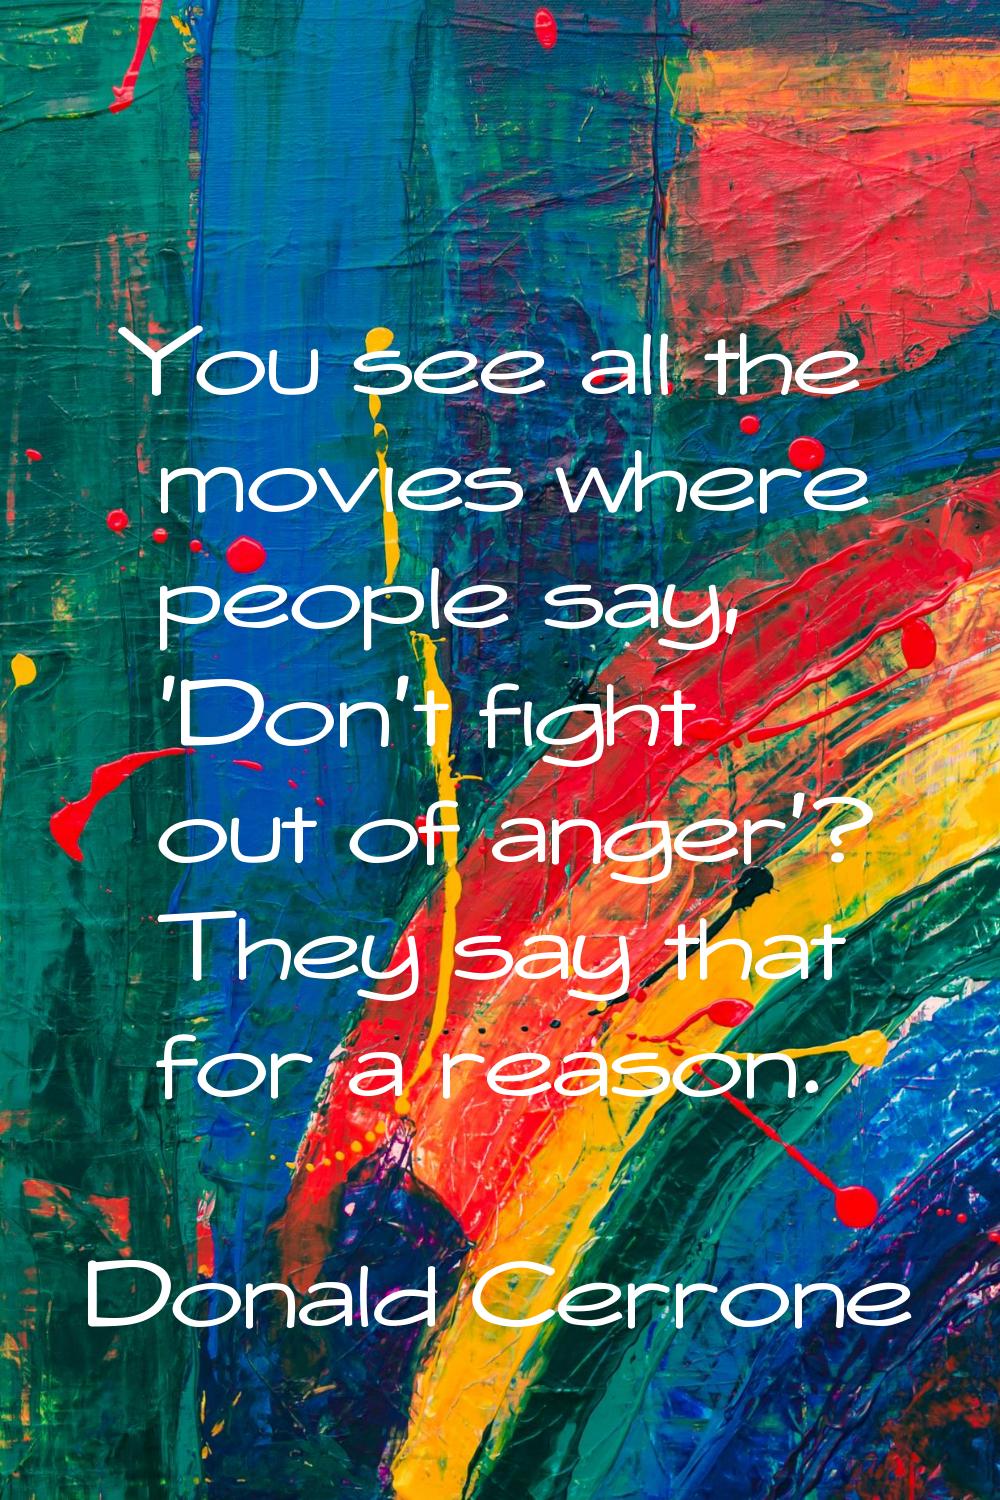 You see all the movies where people say, 'Don't fight out of anger'? They say that for a reason.